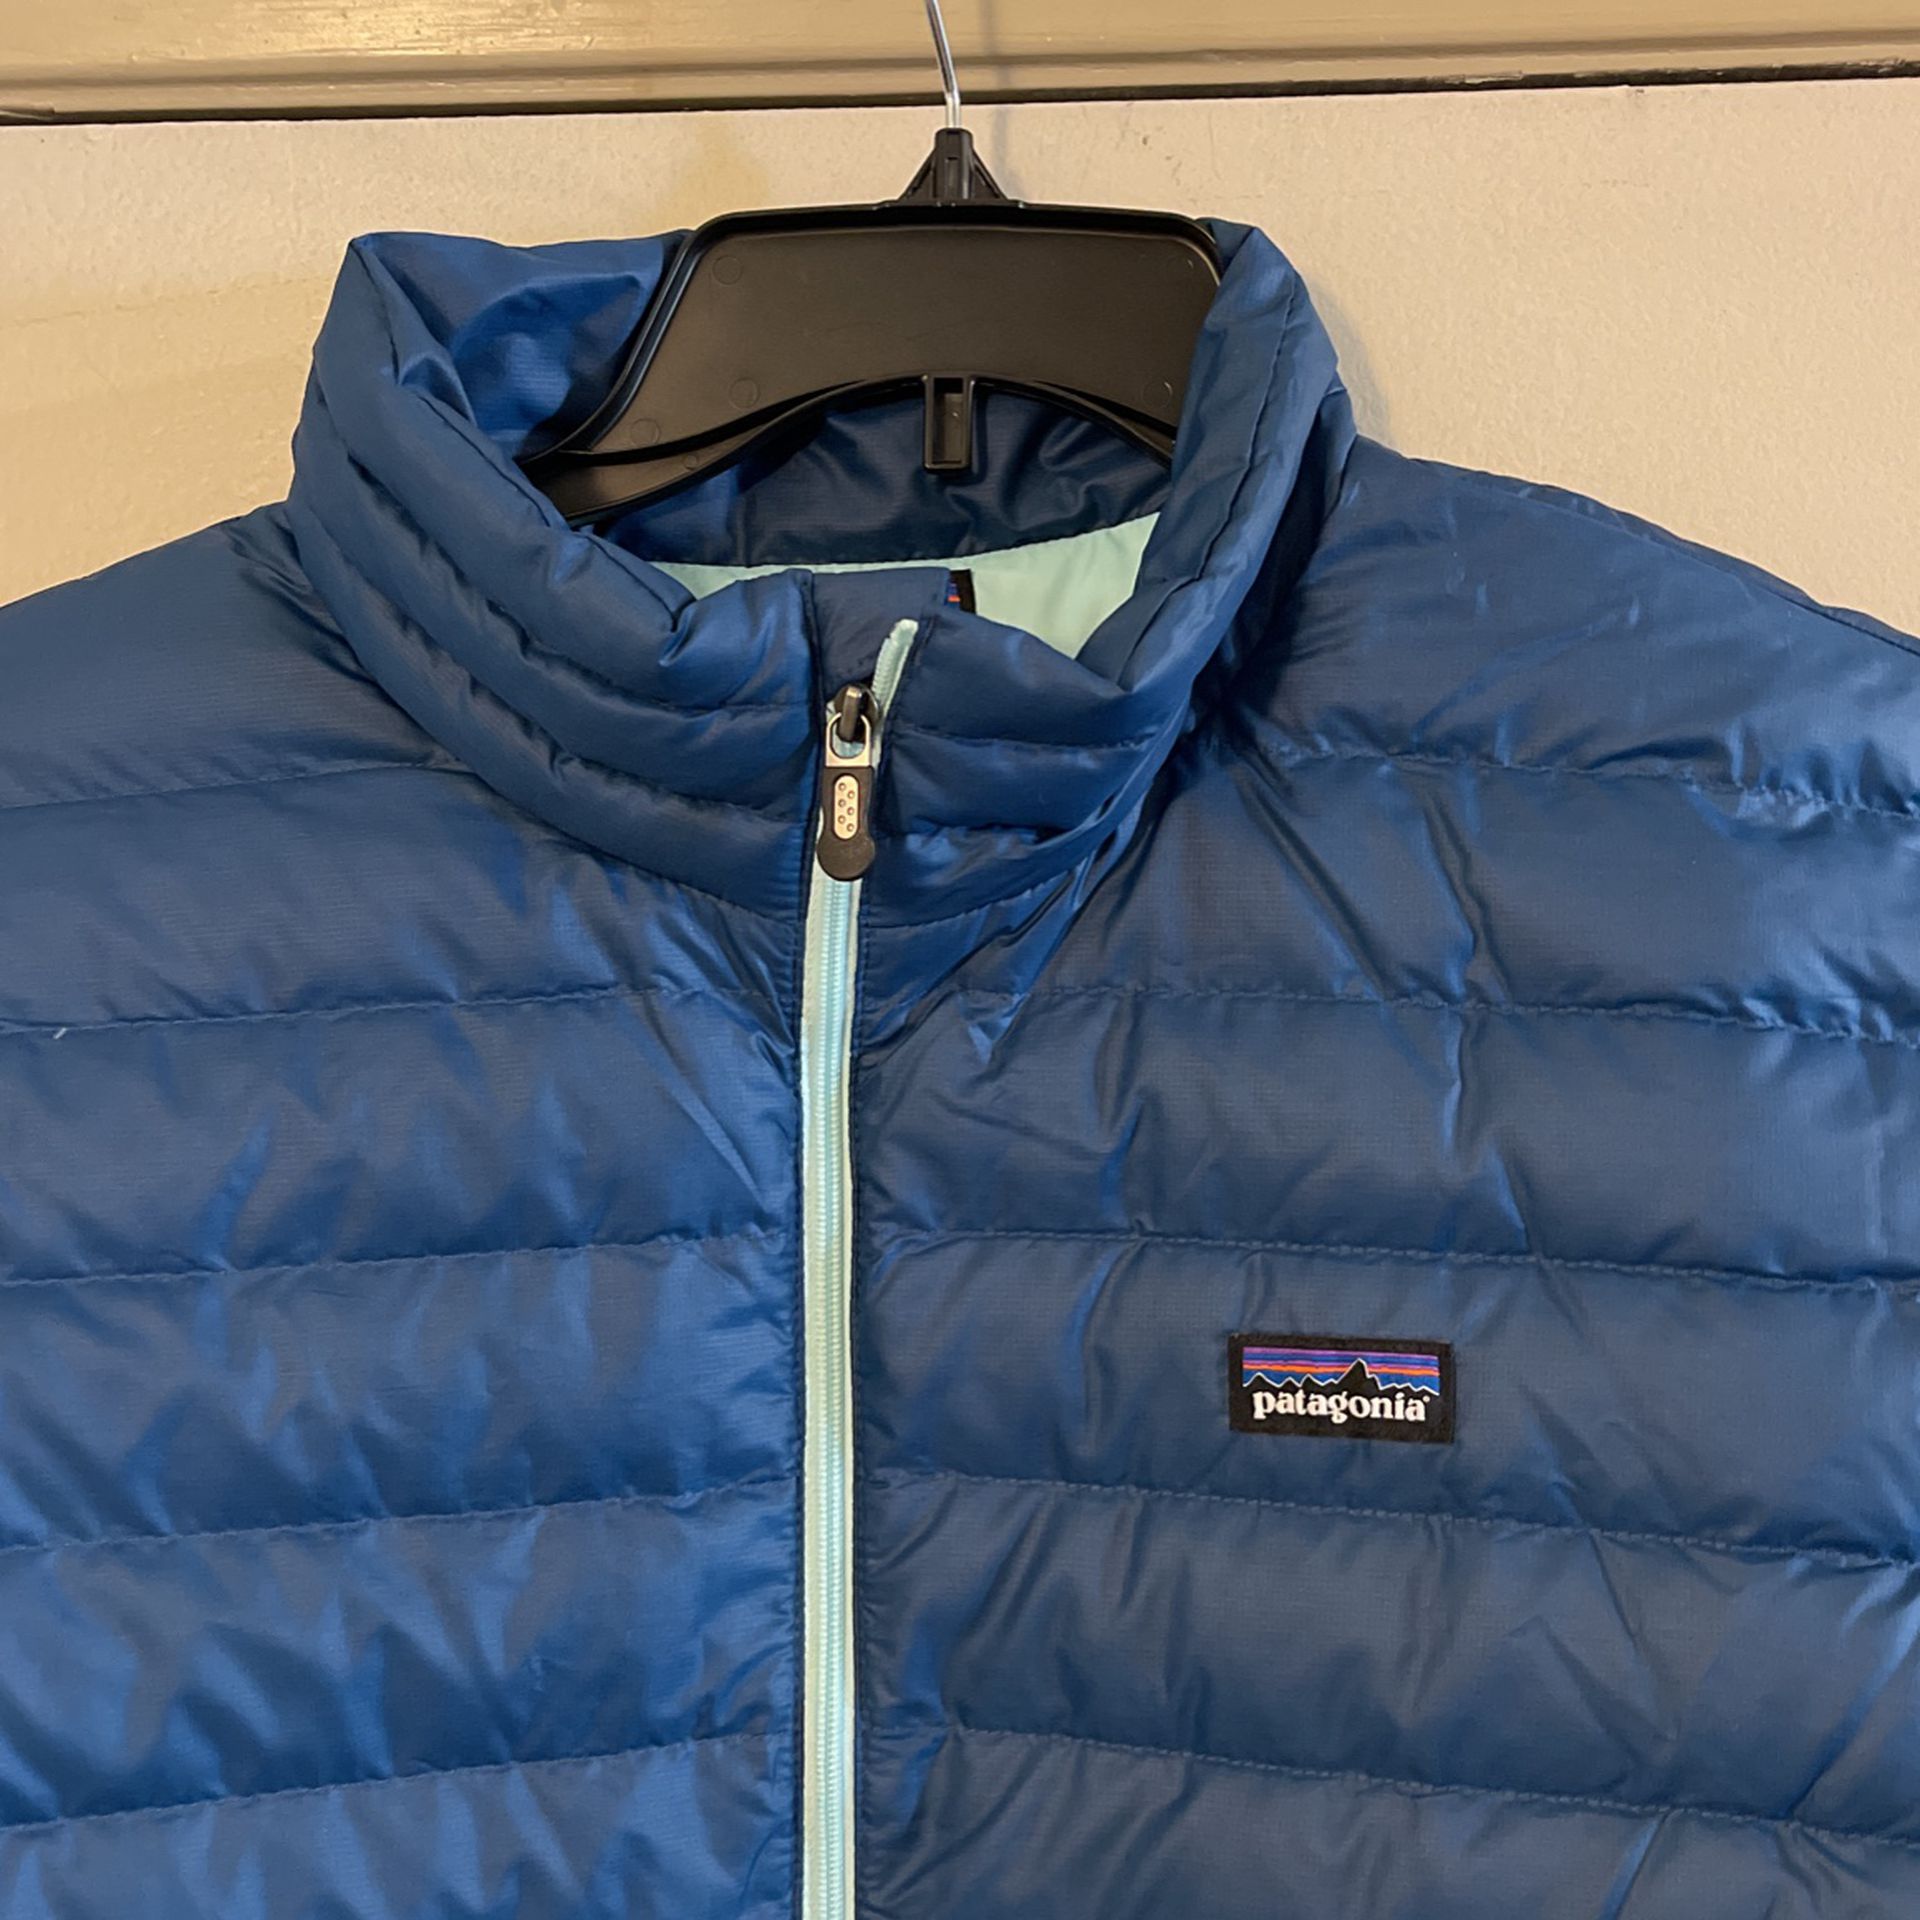 NWT Patagonia Jacket Large. No Deliveries